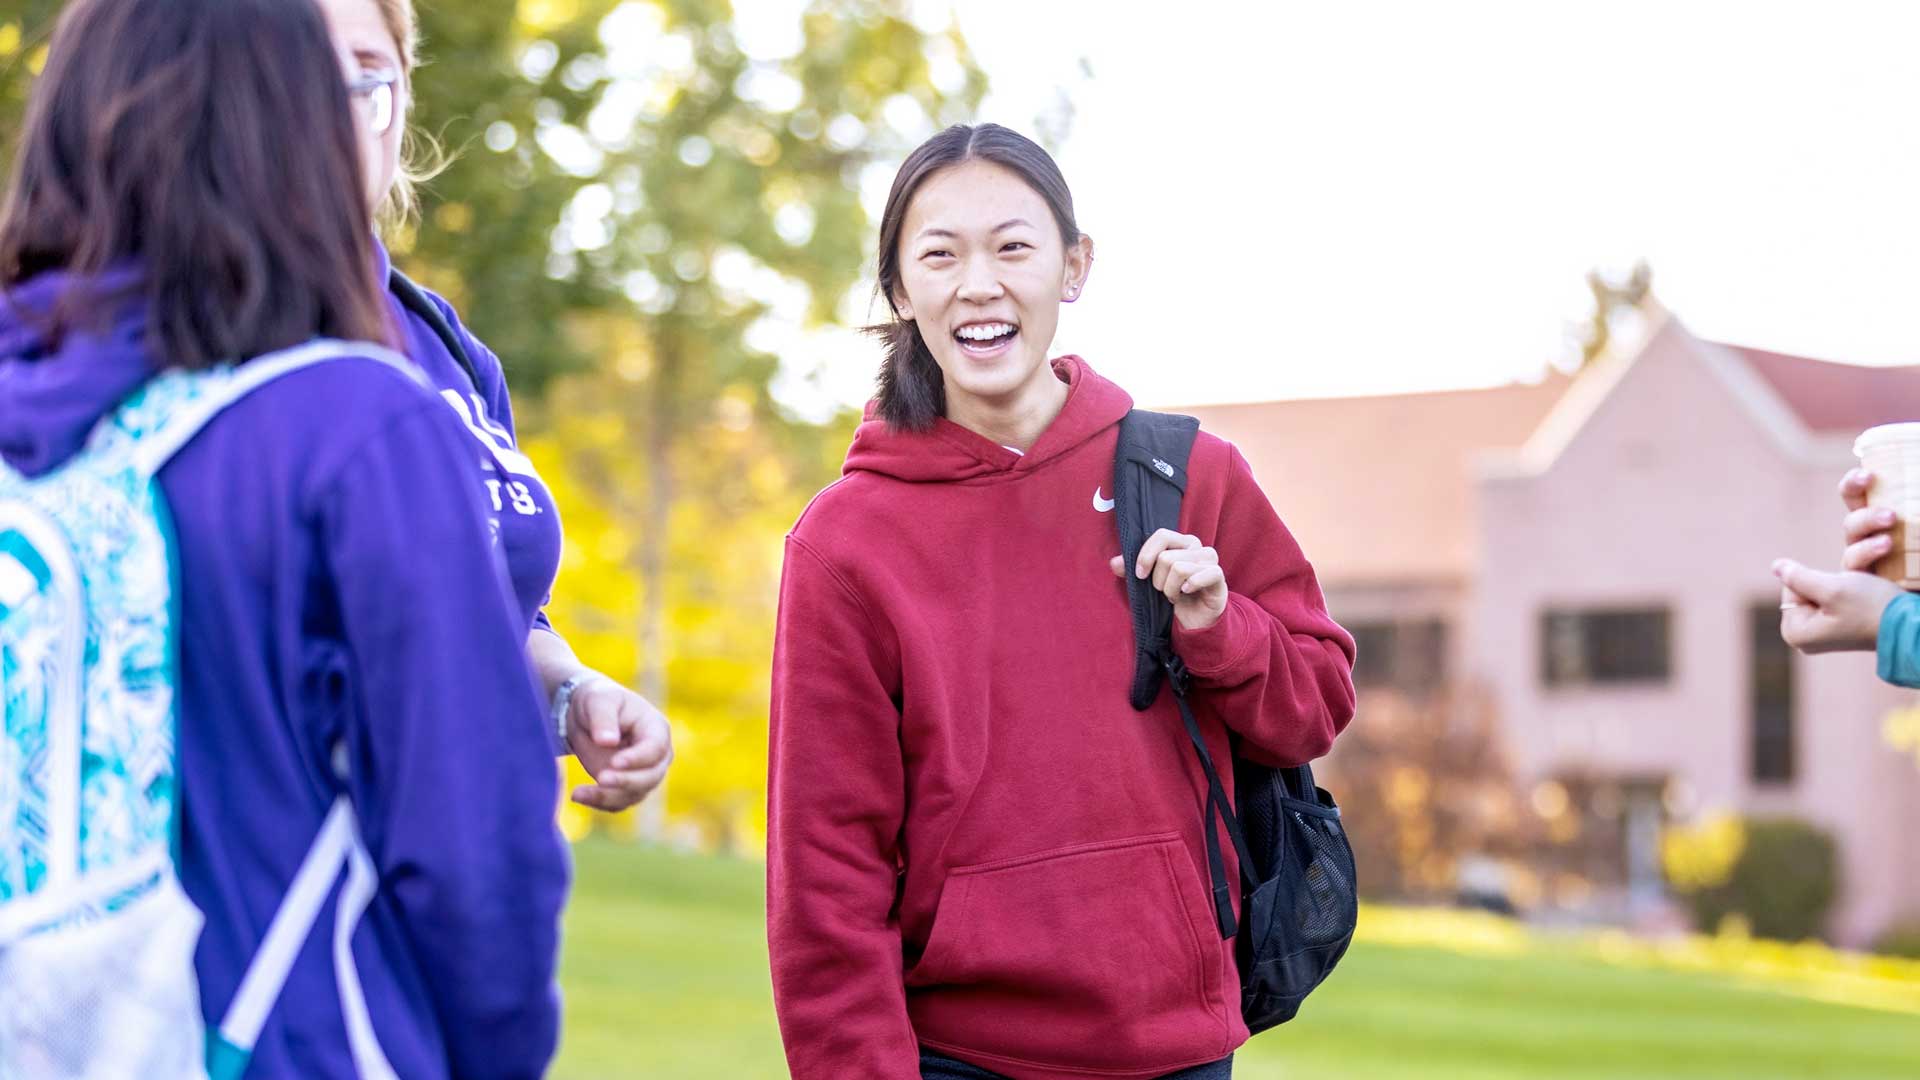 Female student on campus smiling